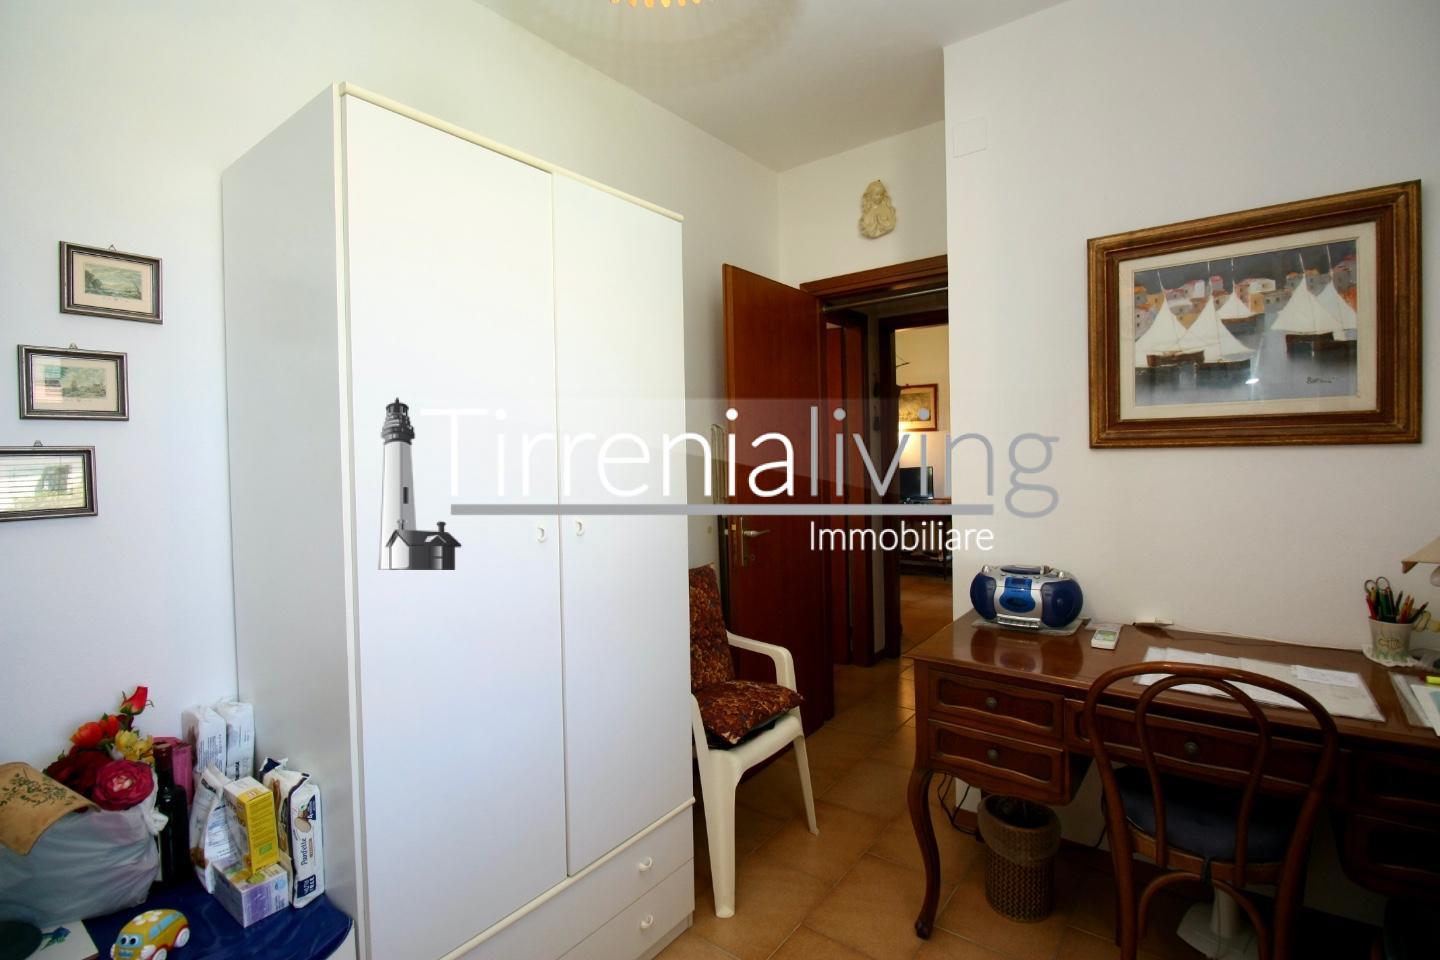 Apartment for sale, ref. T-246